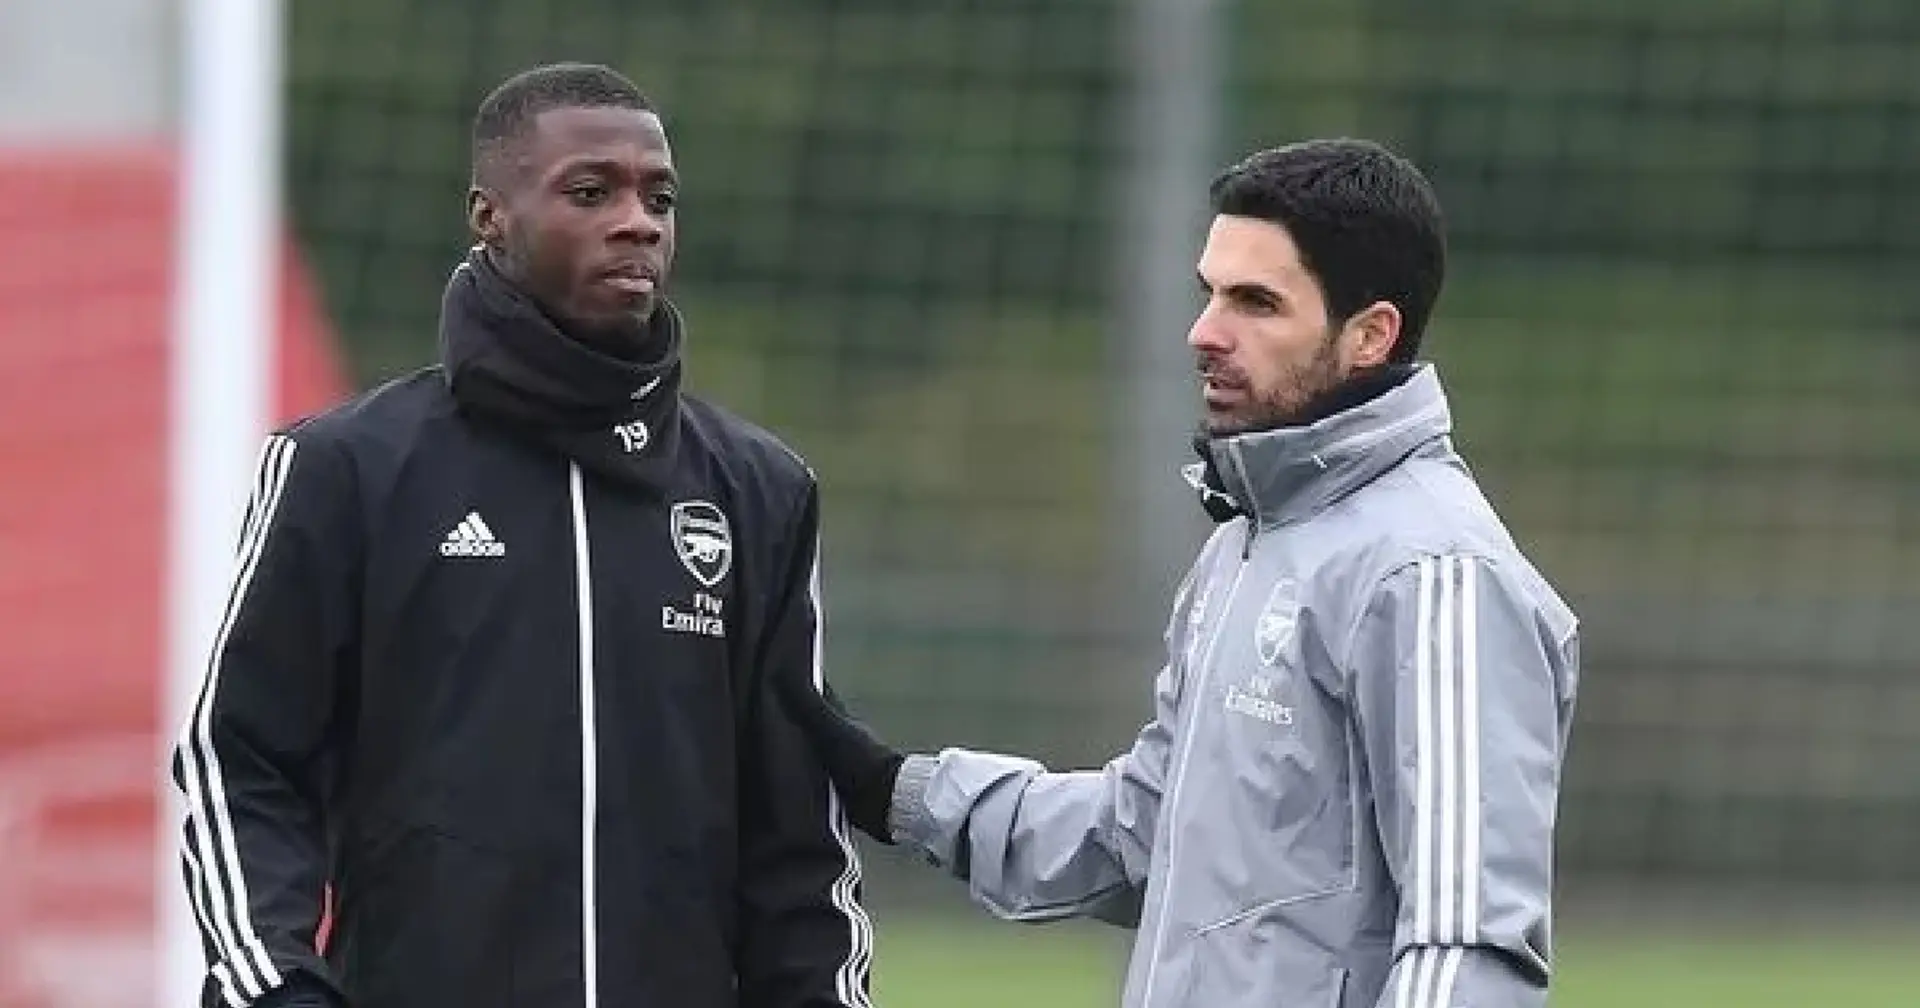 Nicolas Pepe explains what went wrong for him at Arsenal - it had to do with Arteta